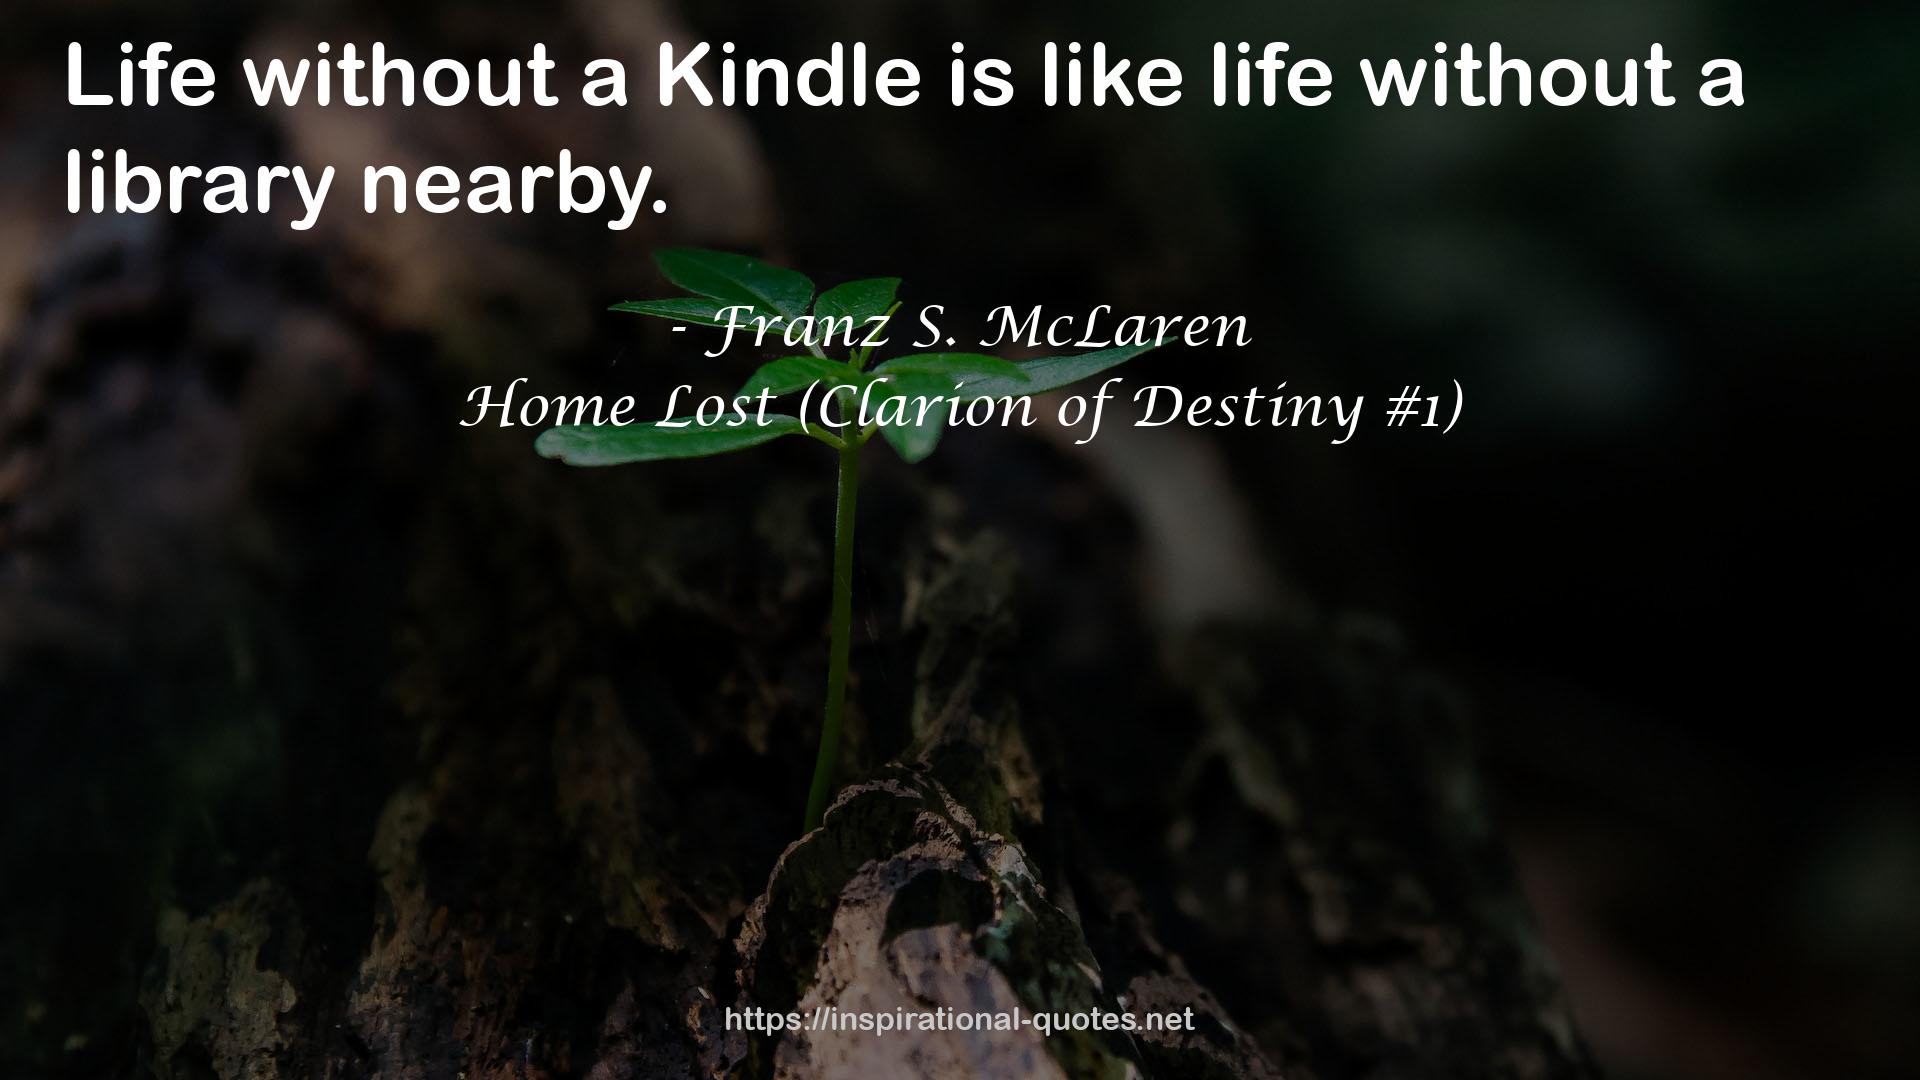 Home Lost (Clarion of Destiny #1) QUOTES